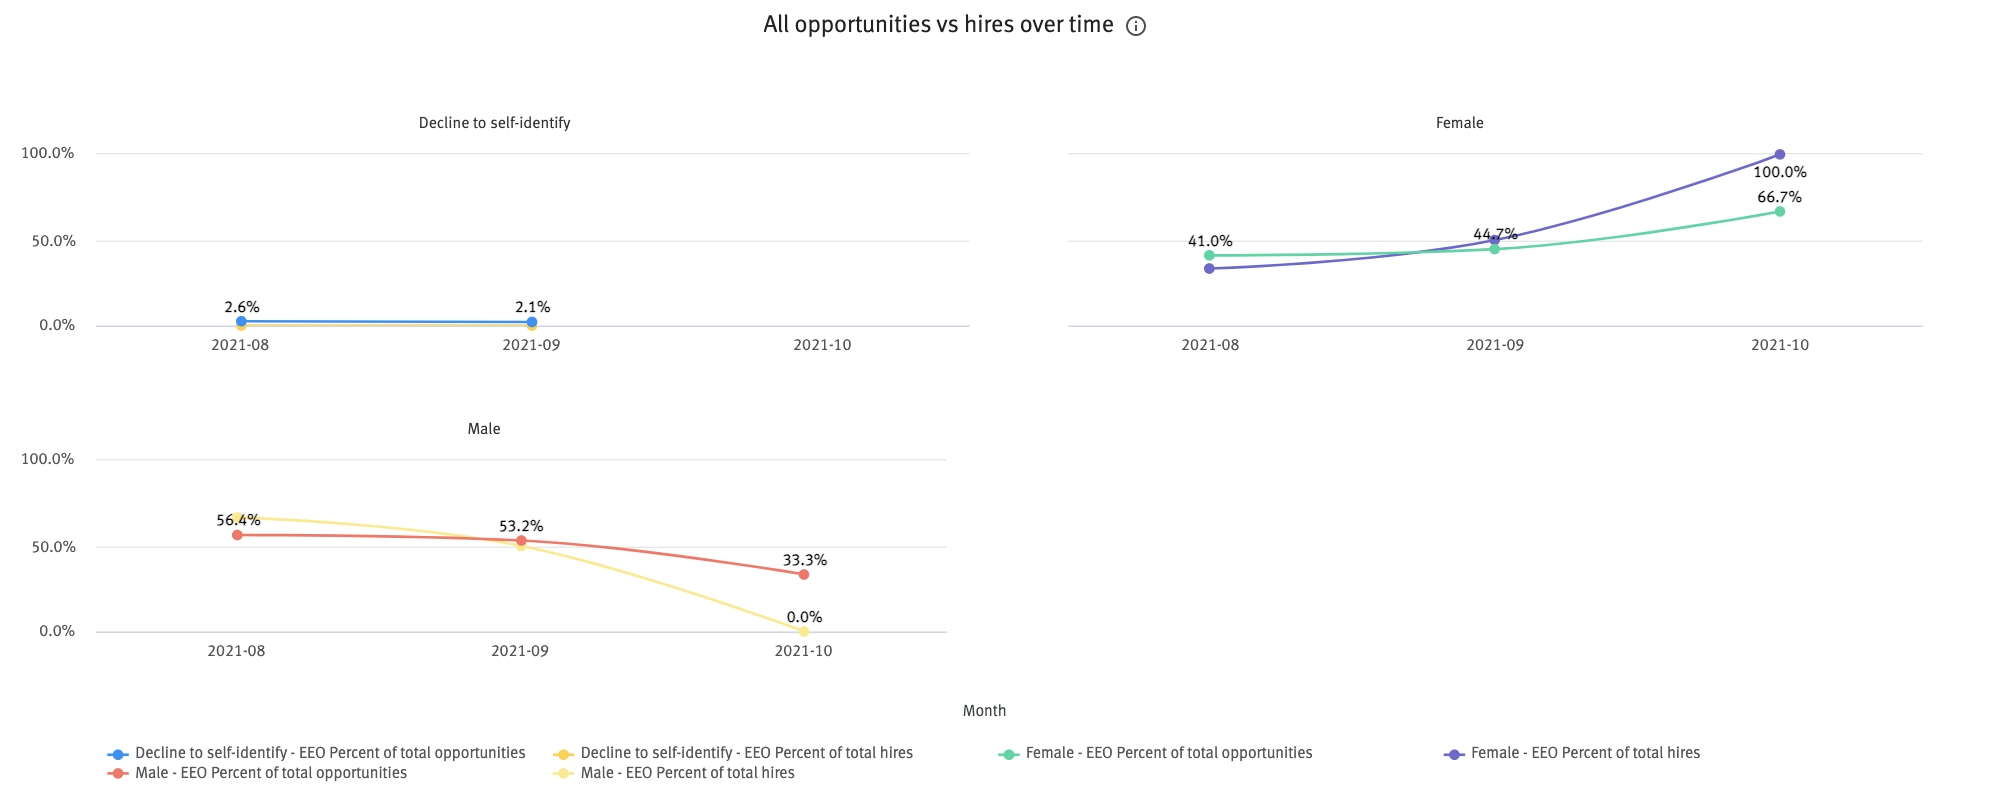 All opportunities vs hires over time chart